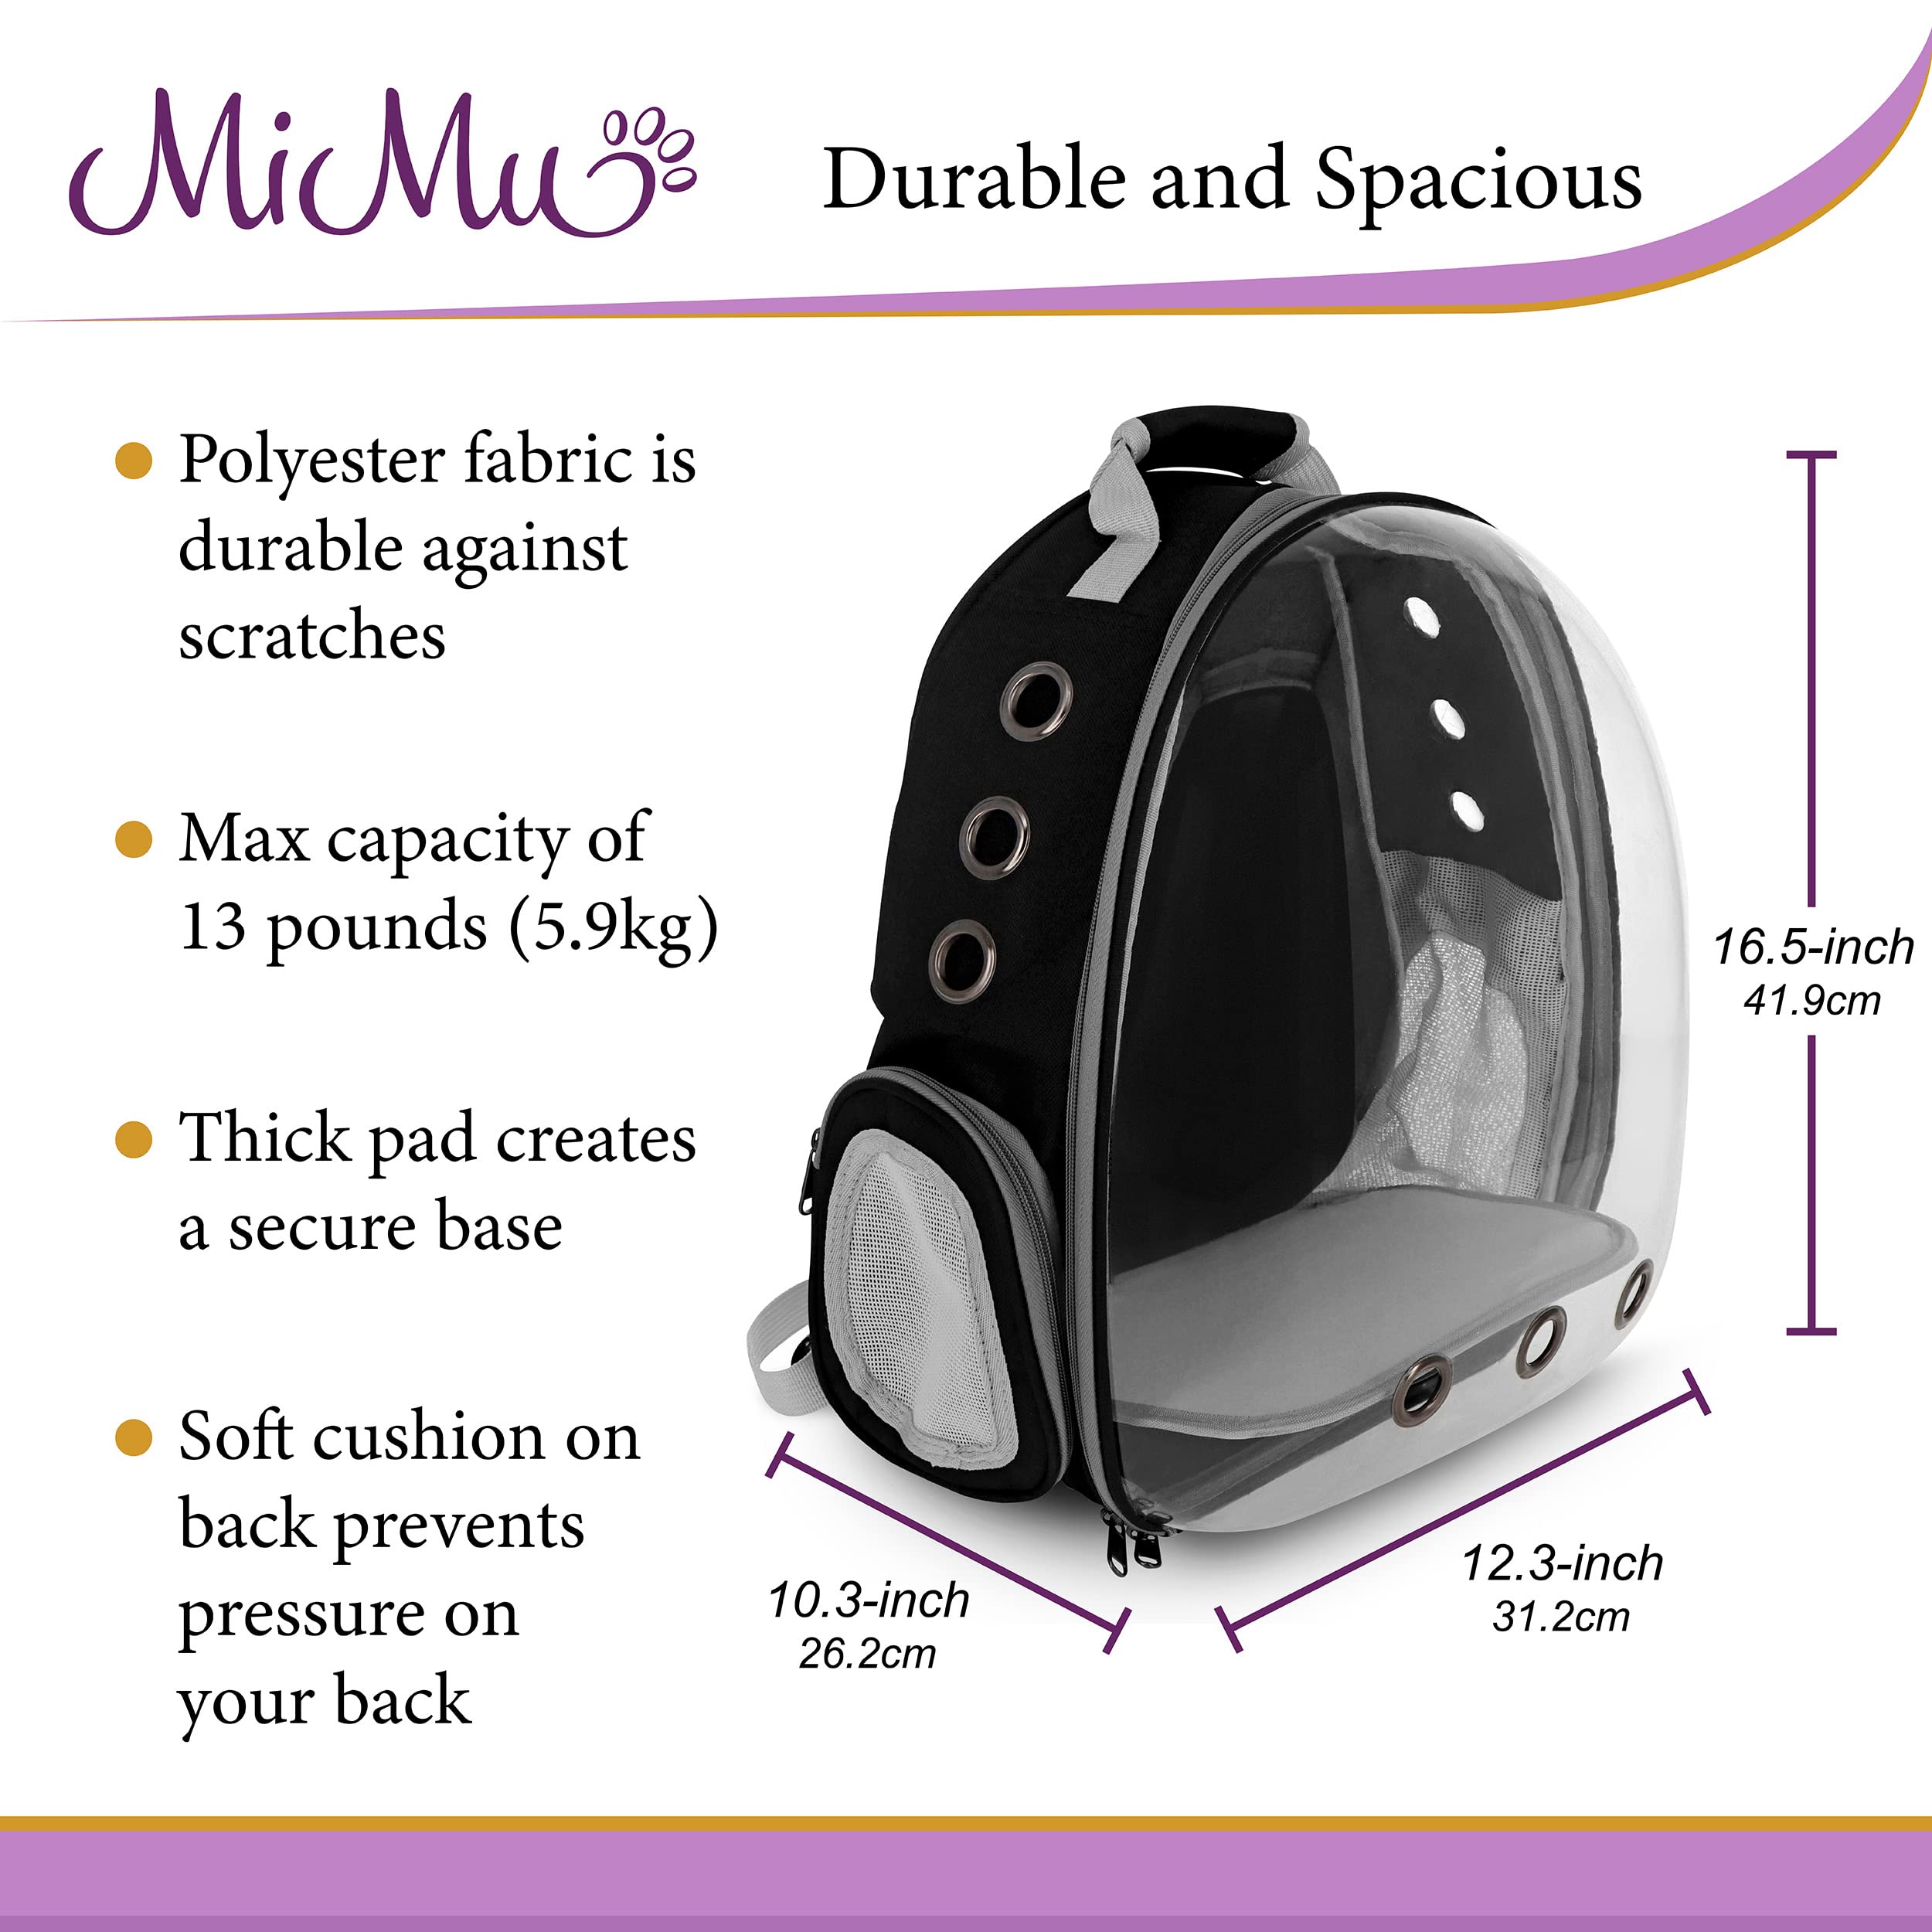 MiMu Bubble Backpack Cat Carrier Bag - Large 13lb Cap Clear Pet Travel Carrier Cat Hiking Backpack for Small Animals